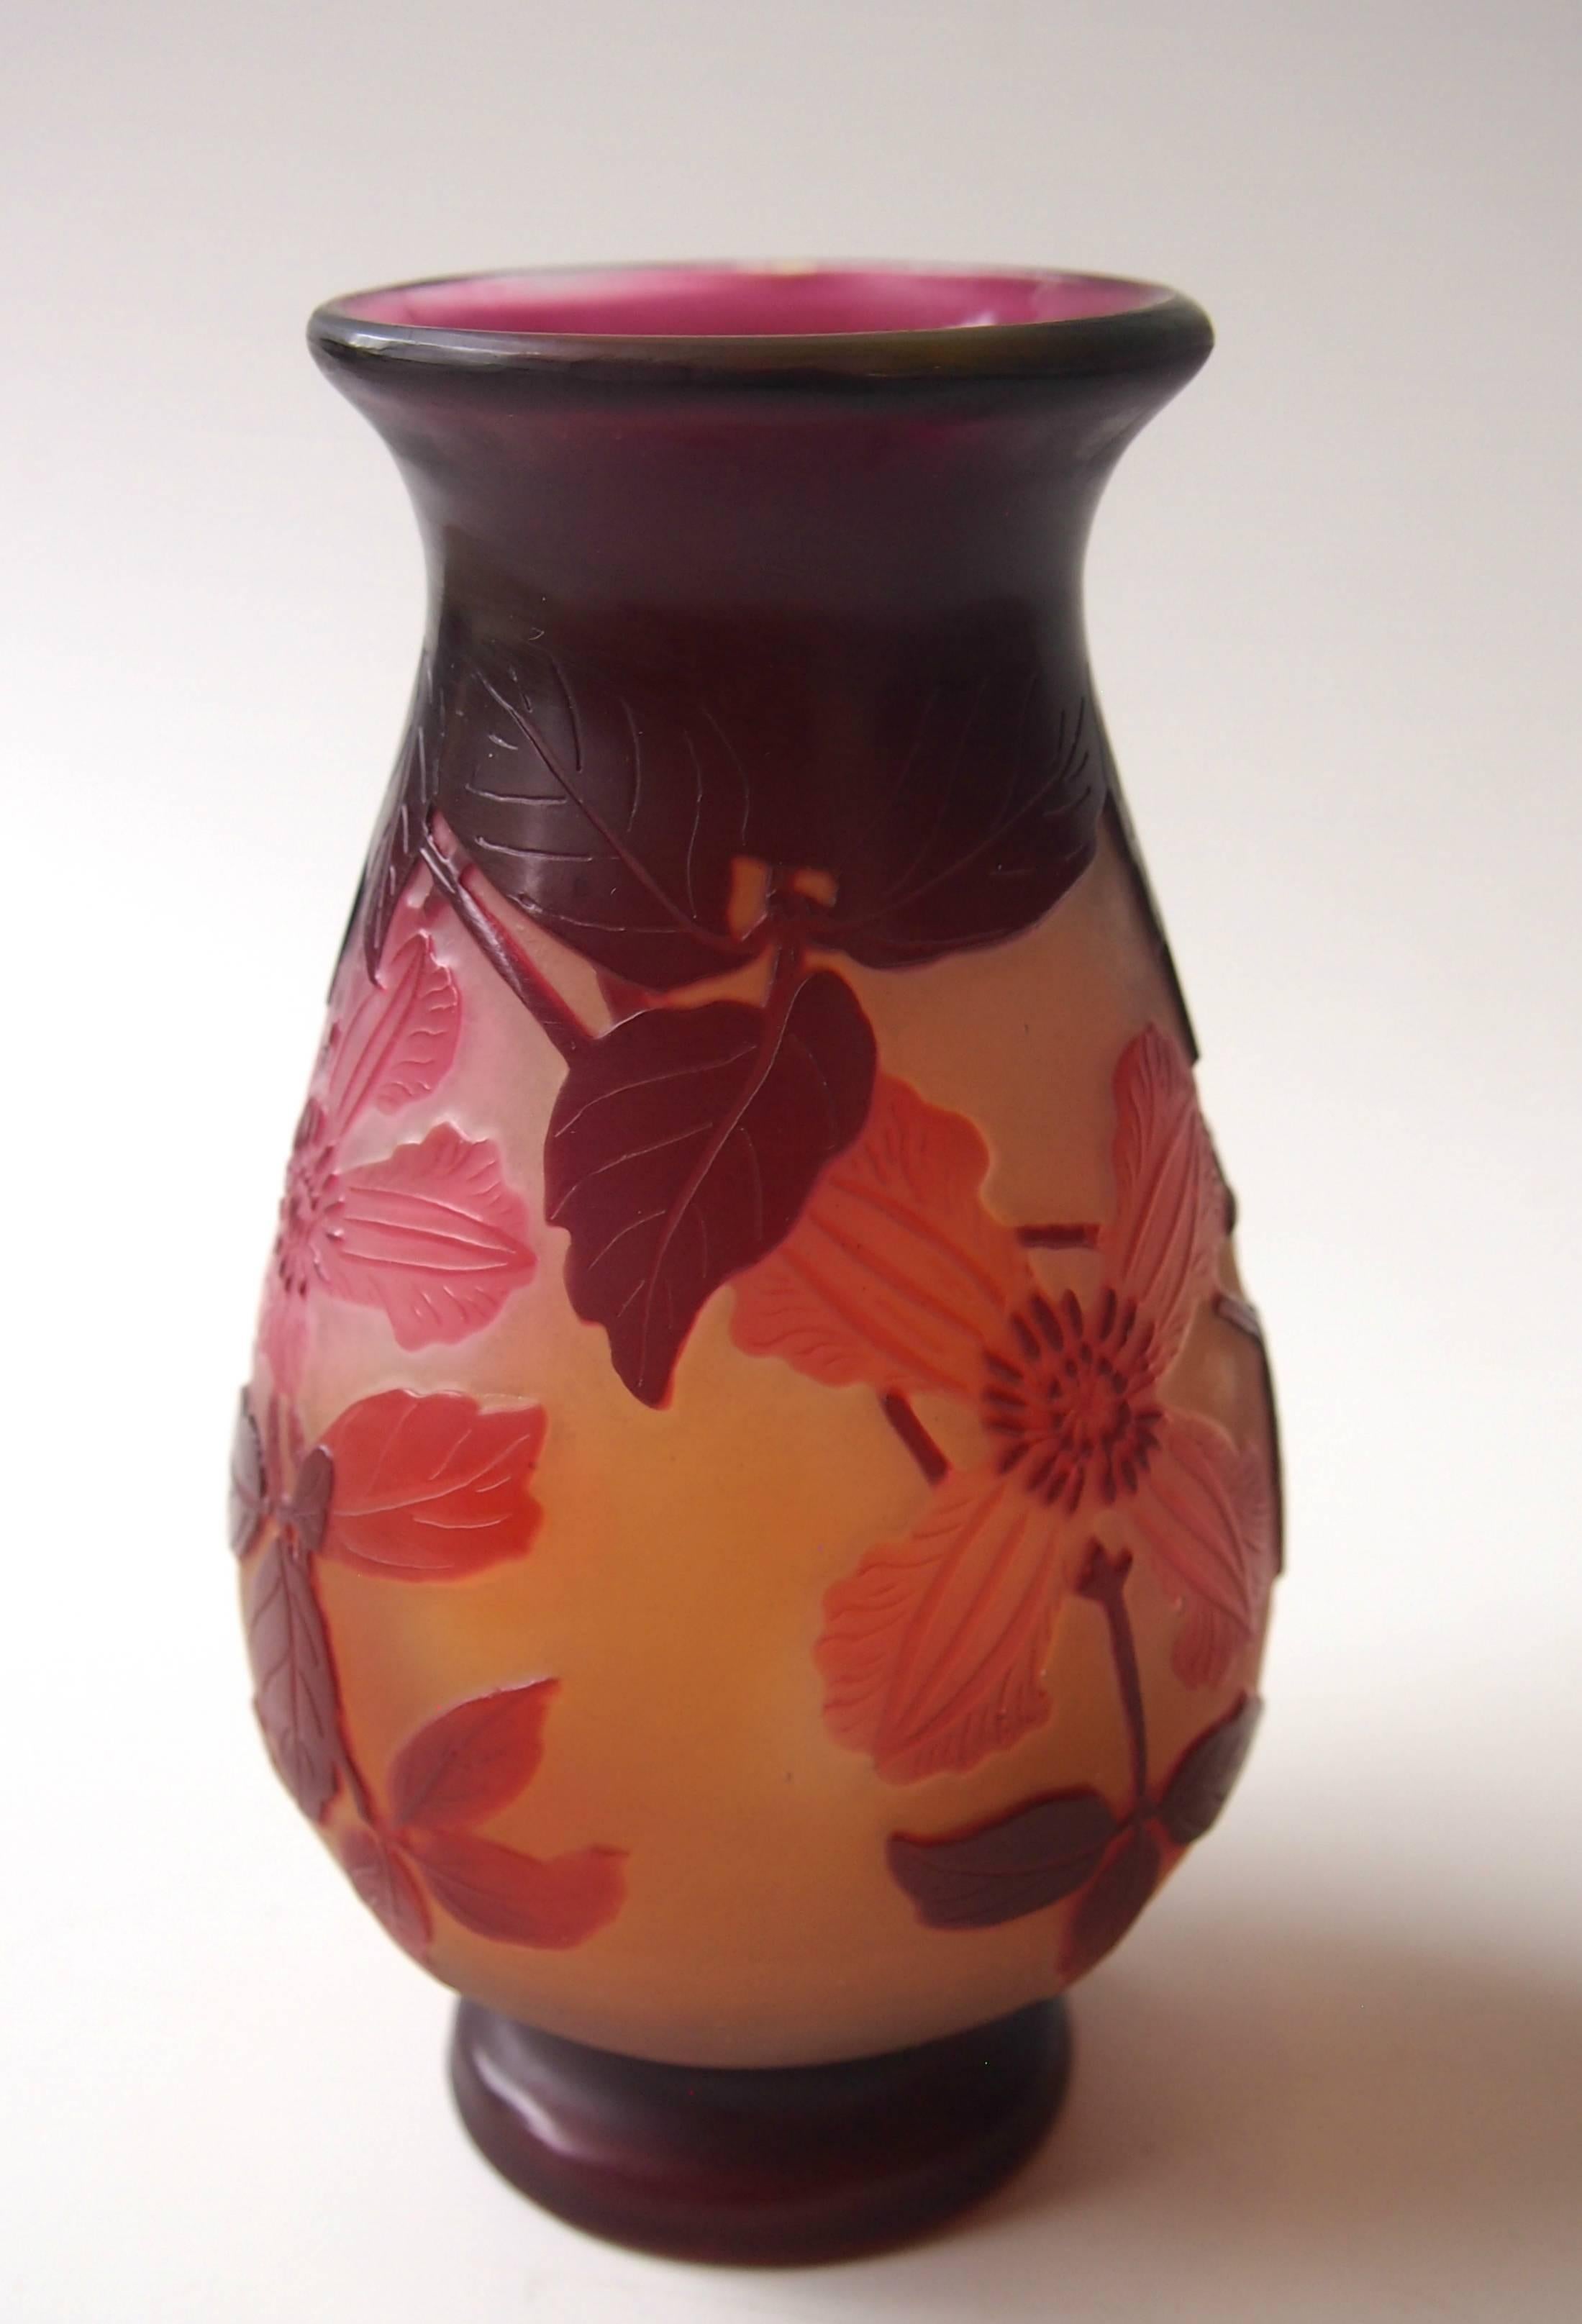 Fine Emile Galle Art Nouveau cameo vase decorated with trailing clematis flowers, in yellow, purple pink and red internally polished. Signed in Cameo

This vase feature a rarer Galle time consuming technique of selective internal polishing, at the